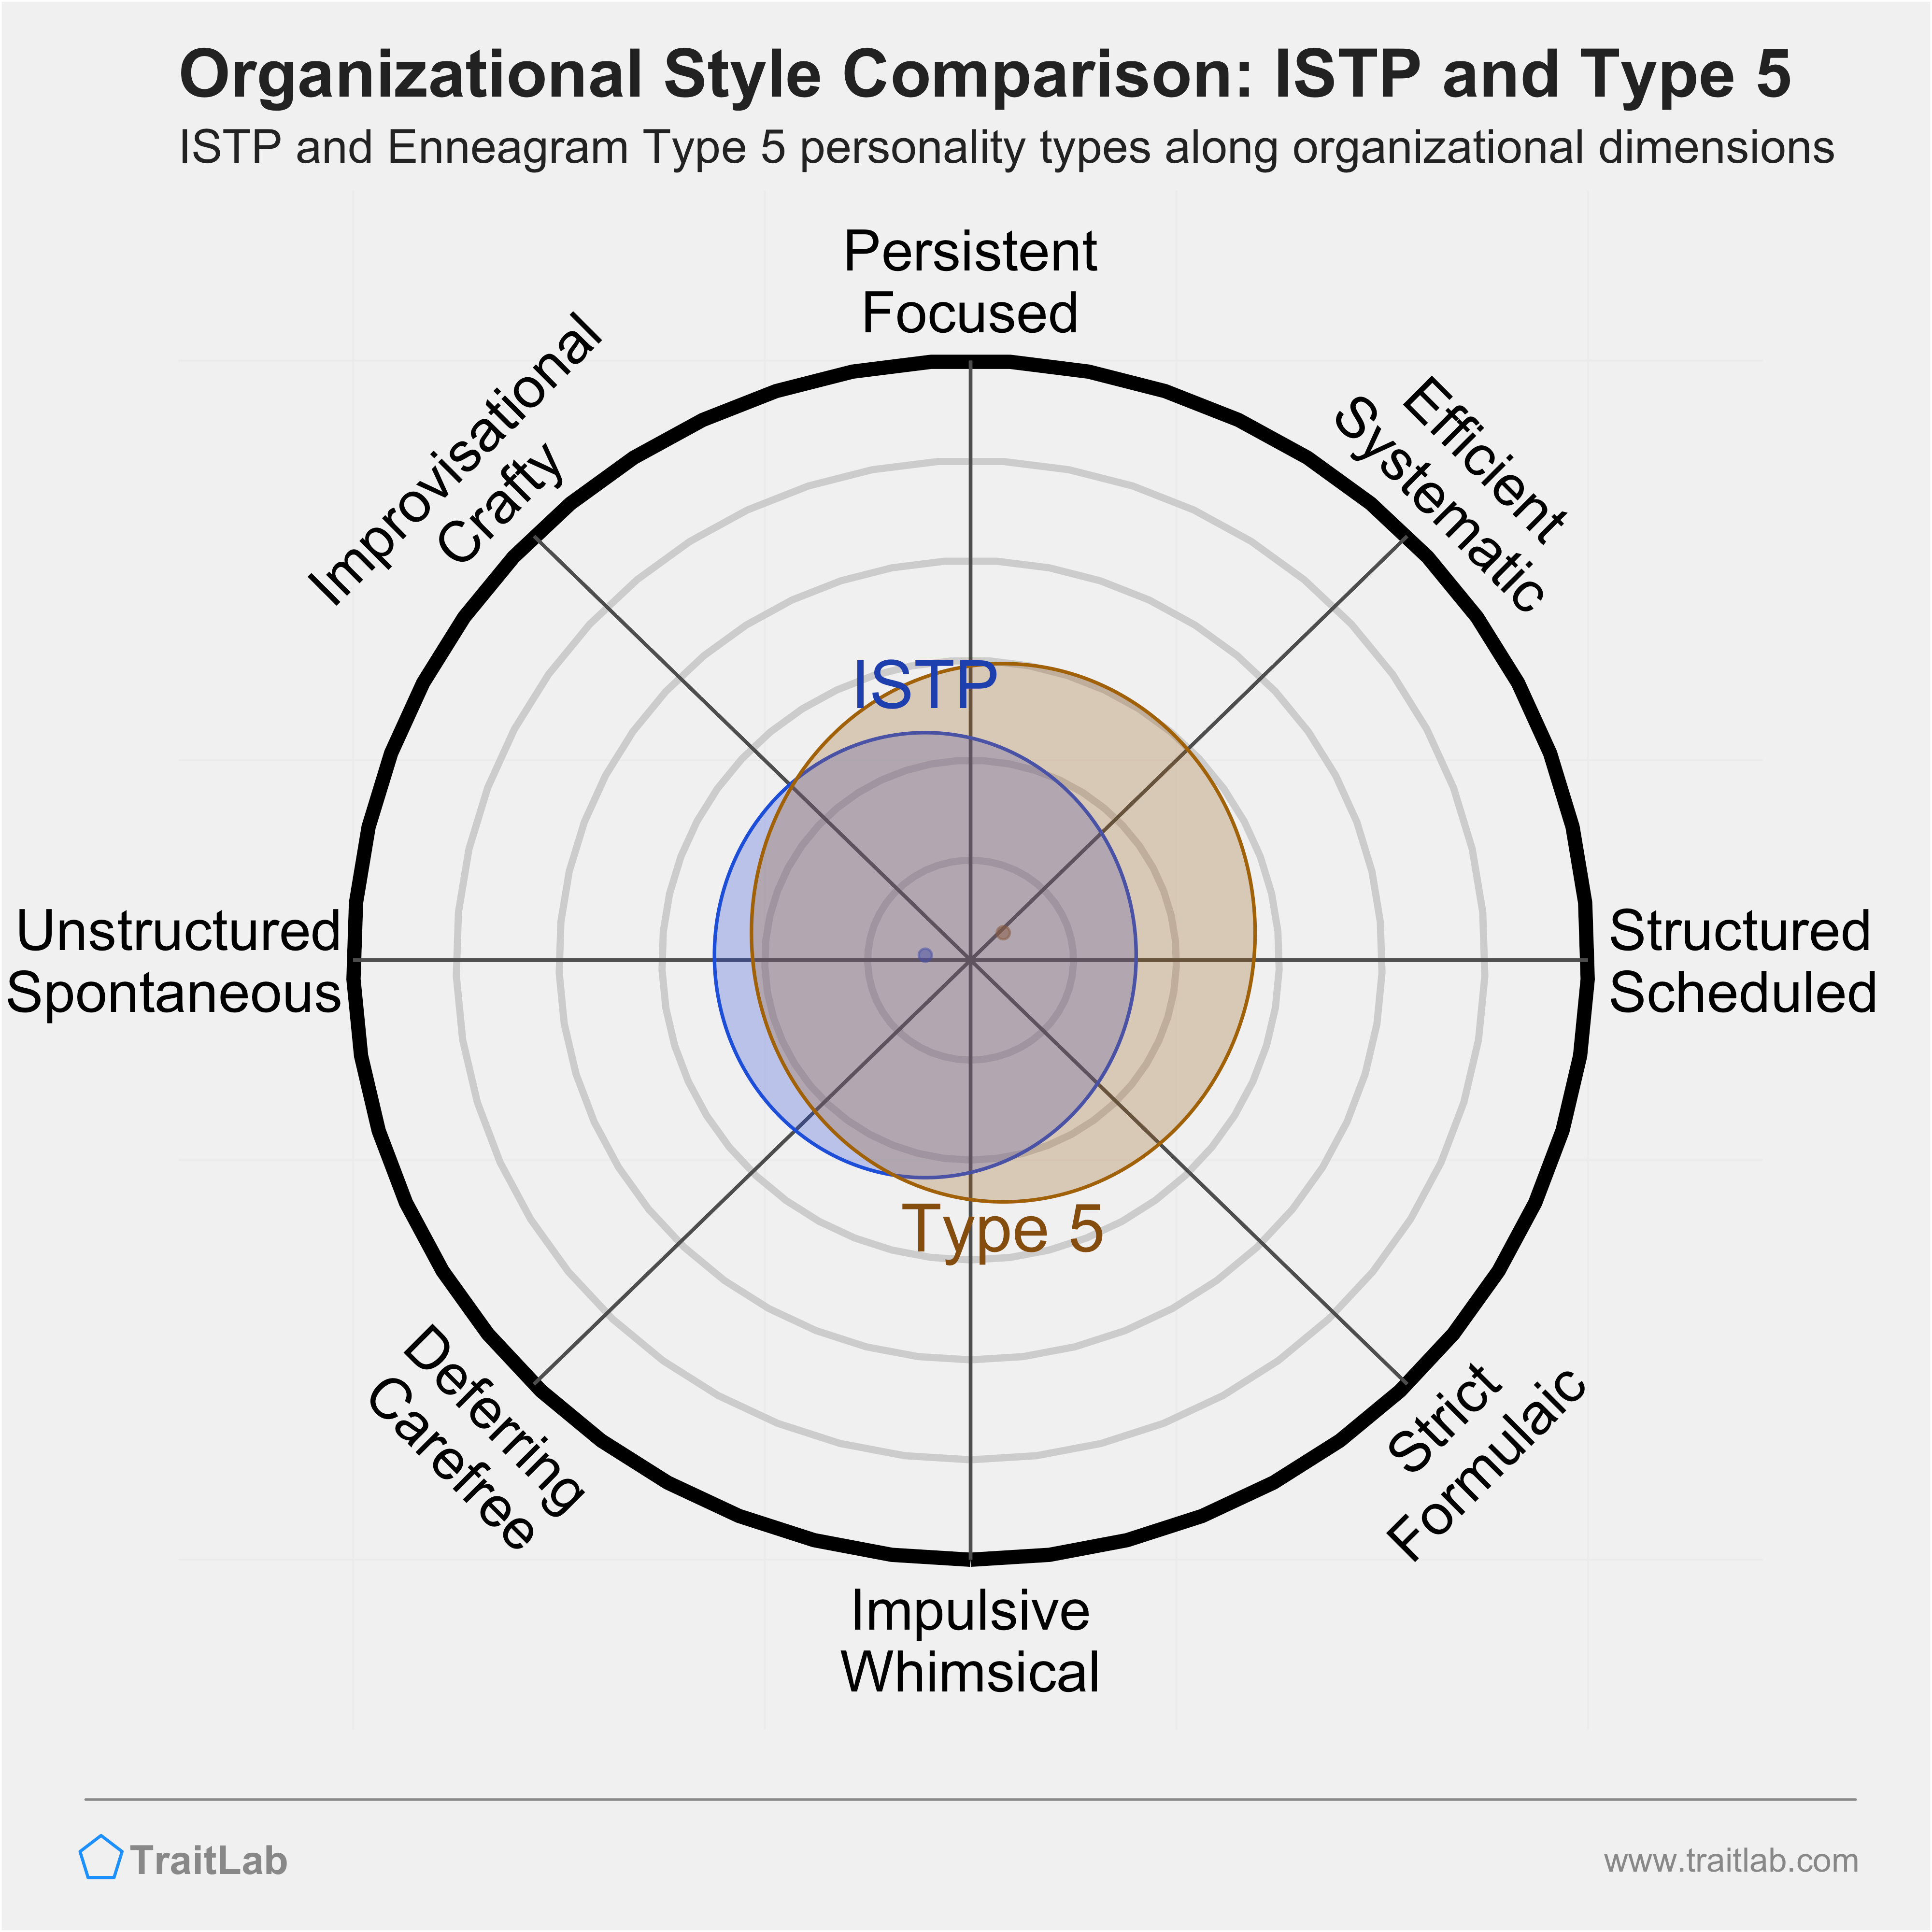 ISTP and Type 5 comparison across organizational dimensions